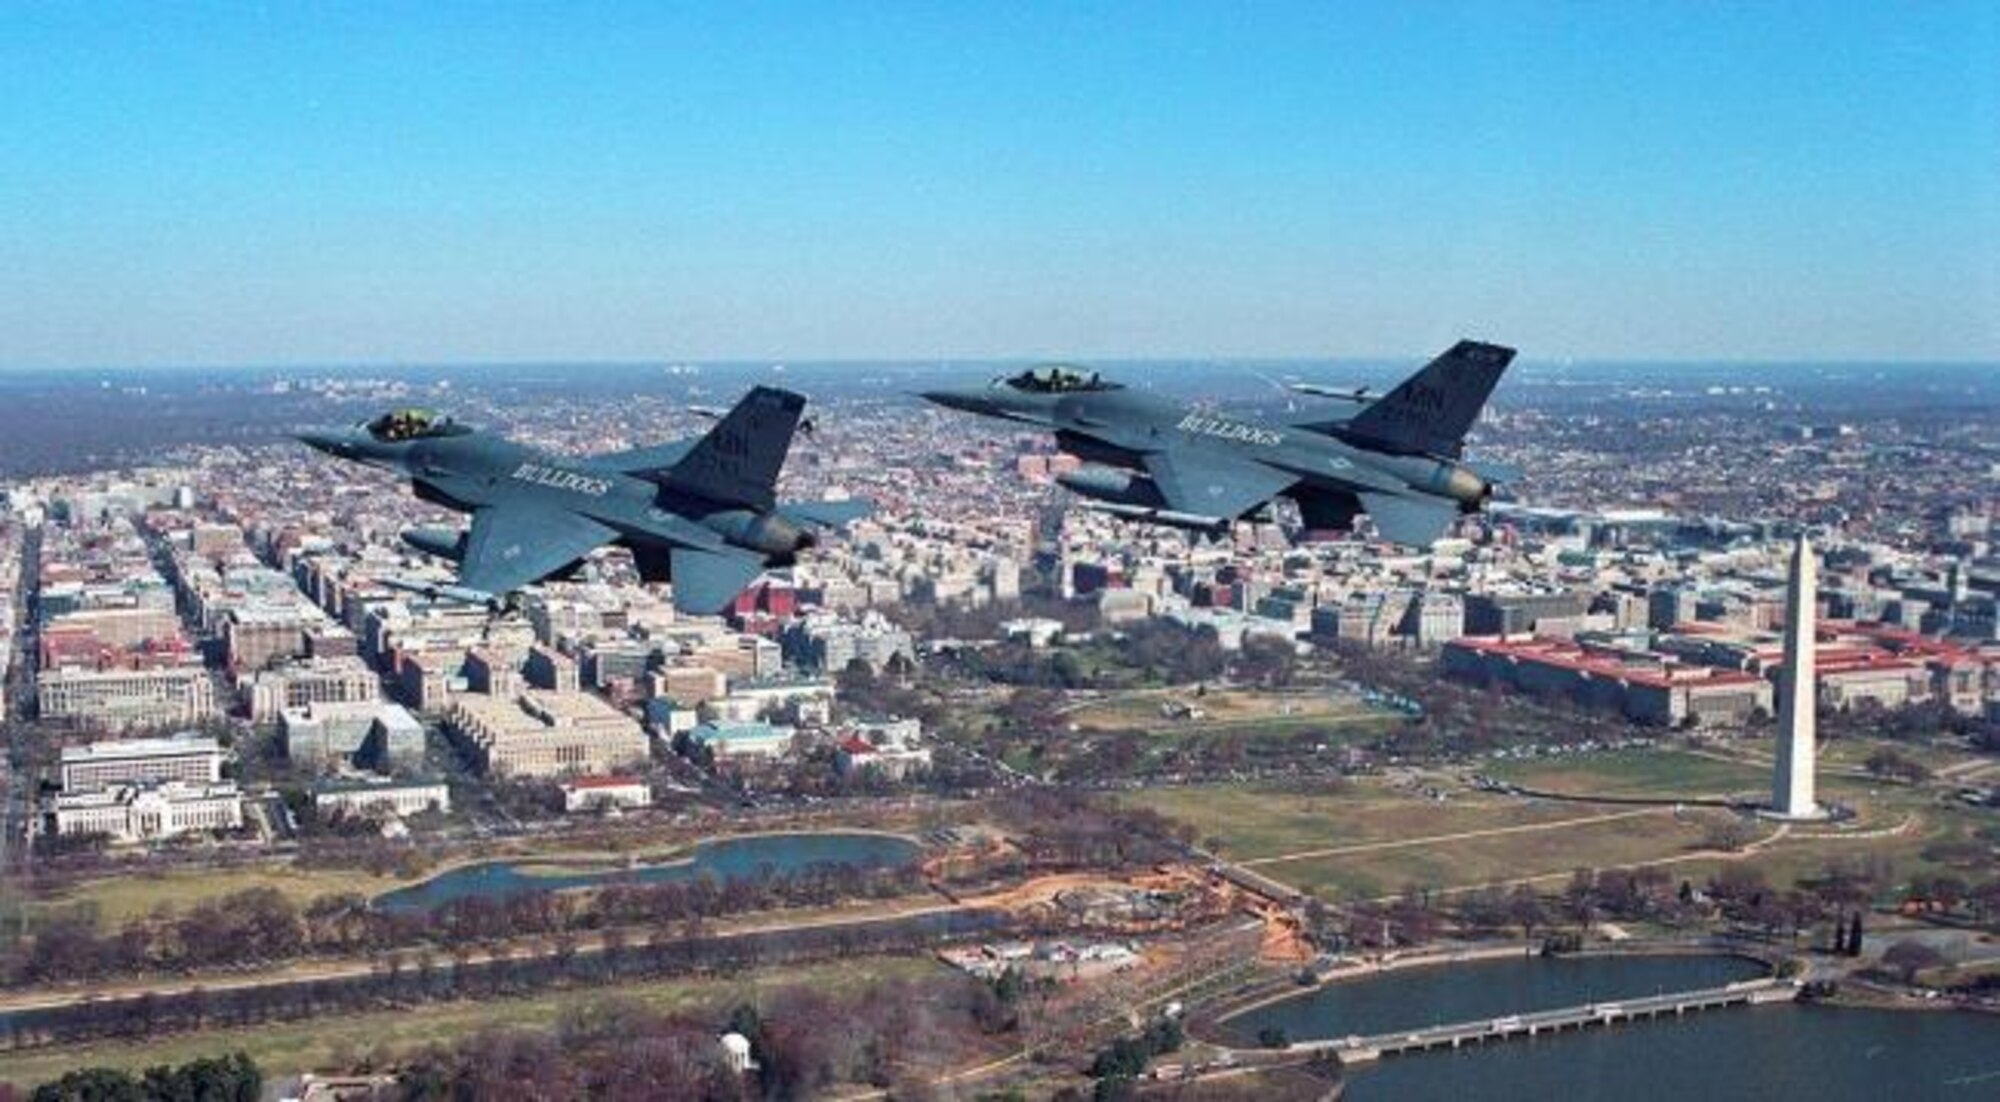 Jets from the 148th Fighter Wing flew combat air patrols over the Washington D.C. area in the months after 9/11.  (Photo courtesy of the 148th Fighter Wing)